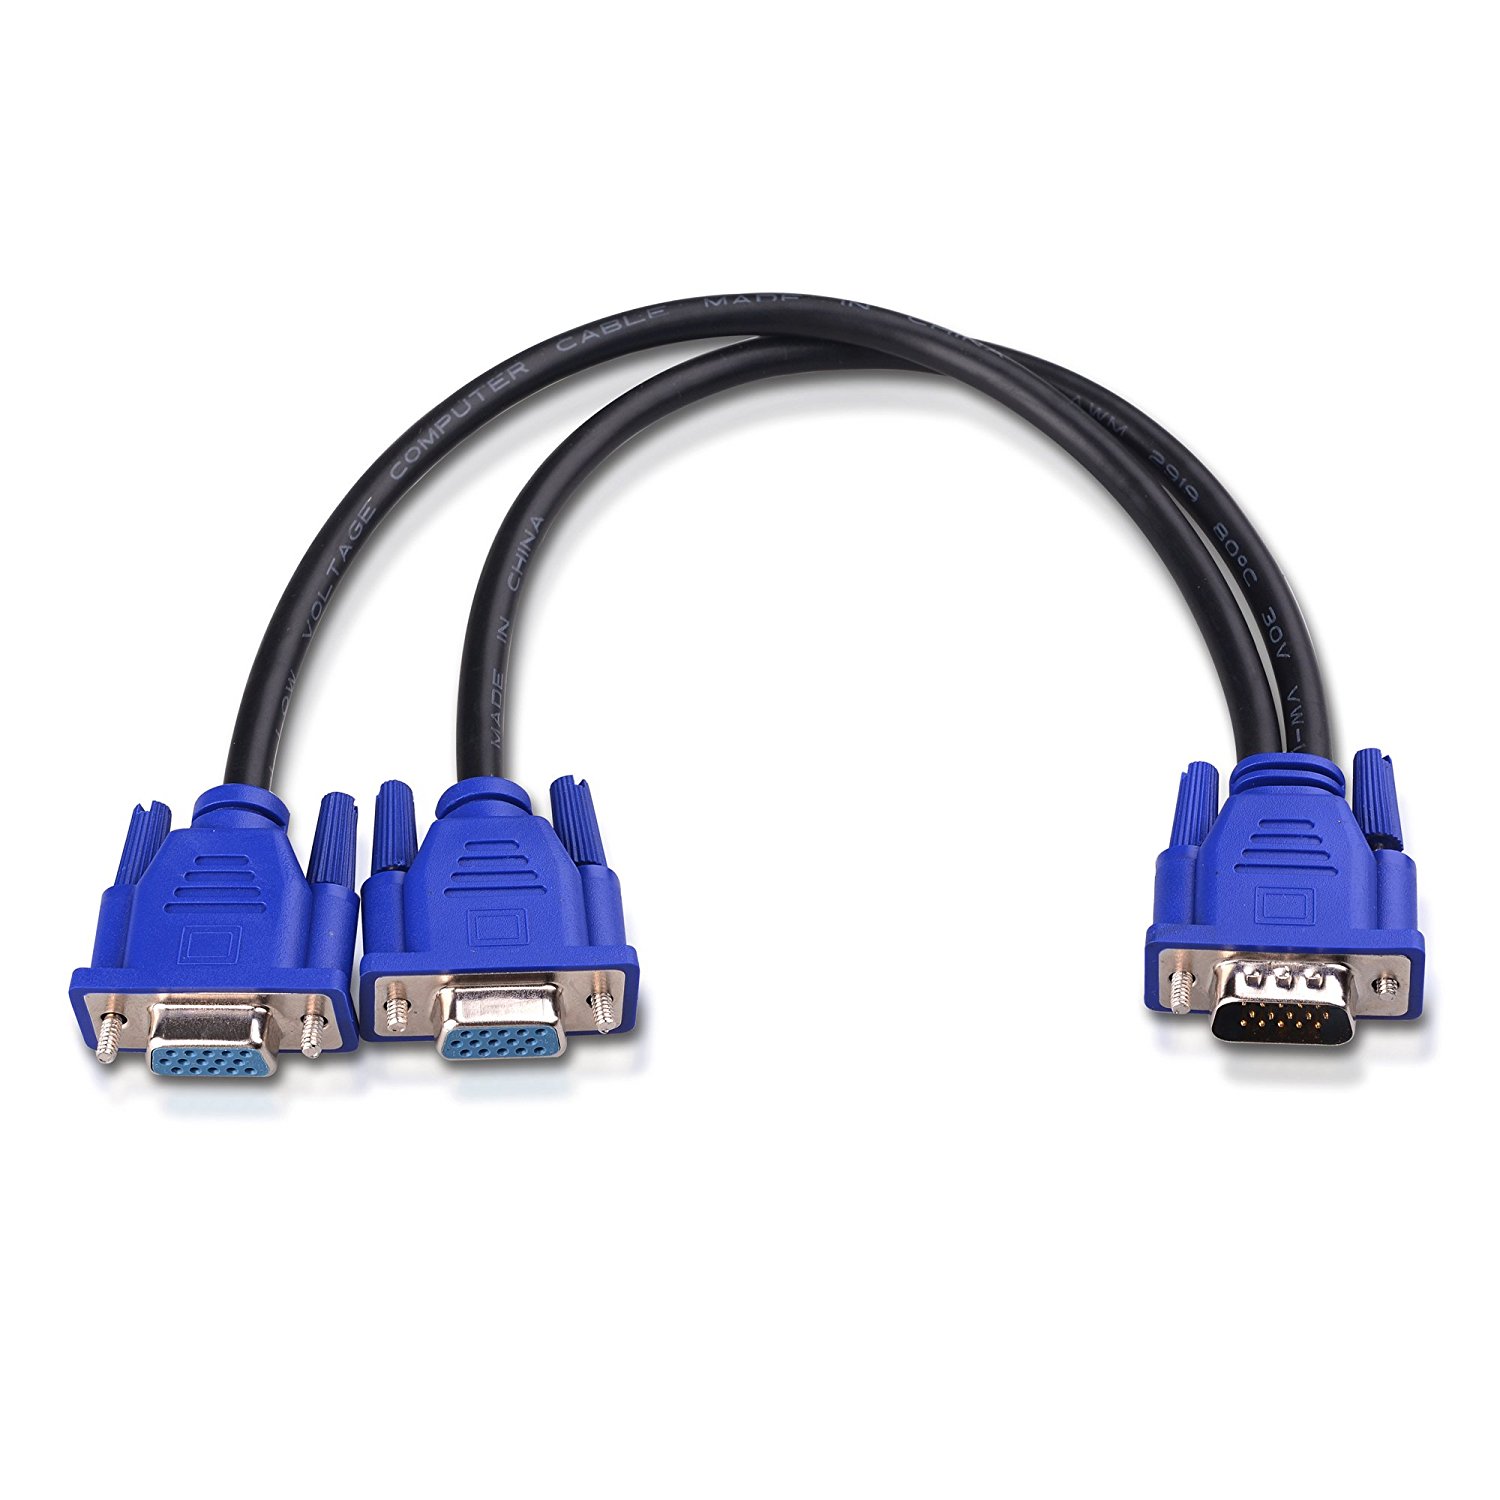 Cable Matters VGA Splitter Cable (VGA Y Splitter) for Screen Duplication - 1 Foot - image 1 of 5